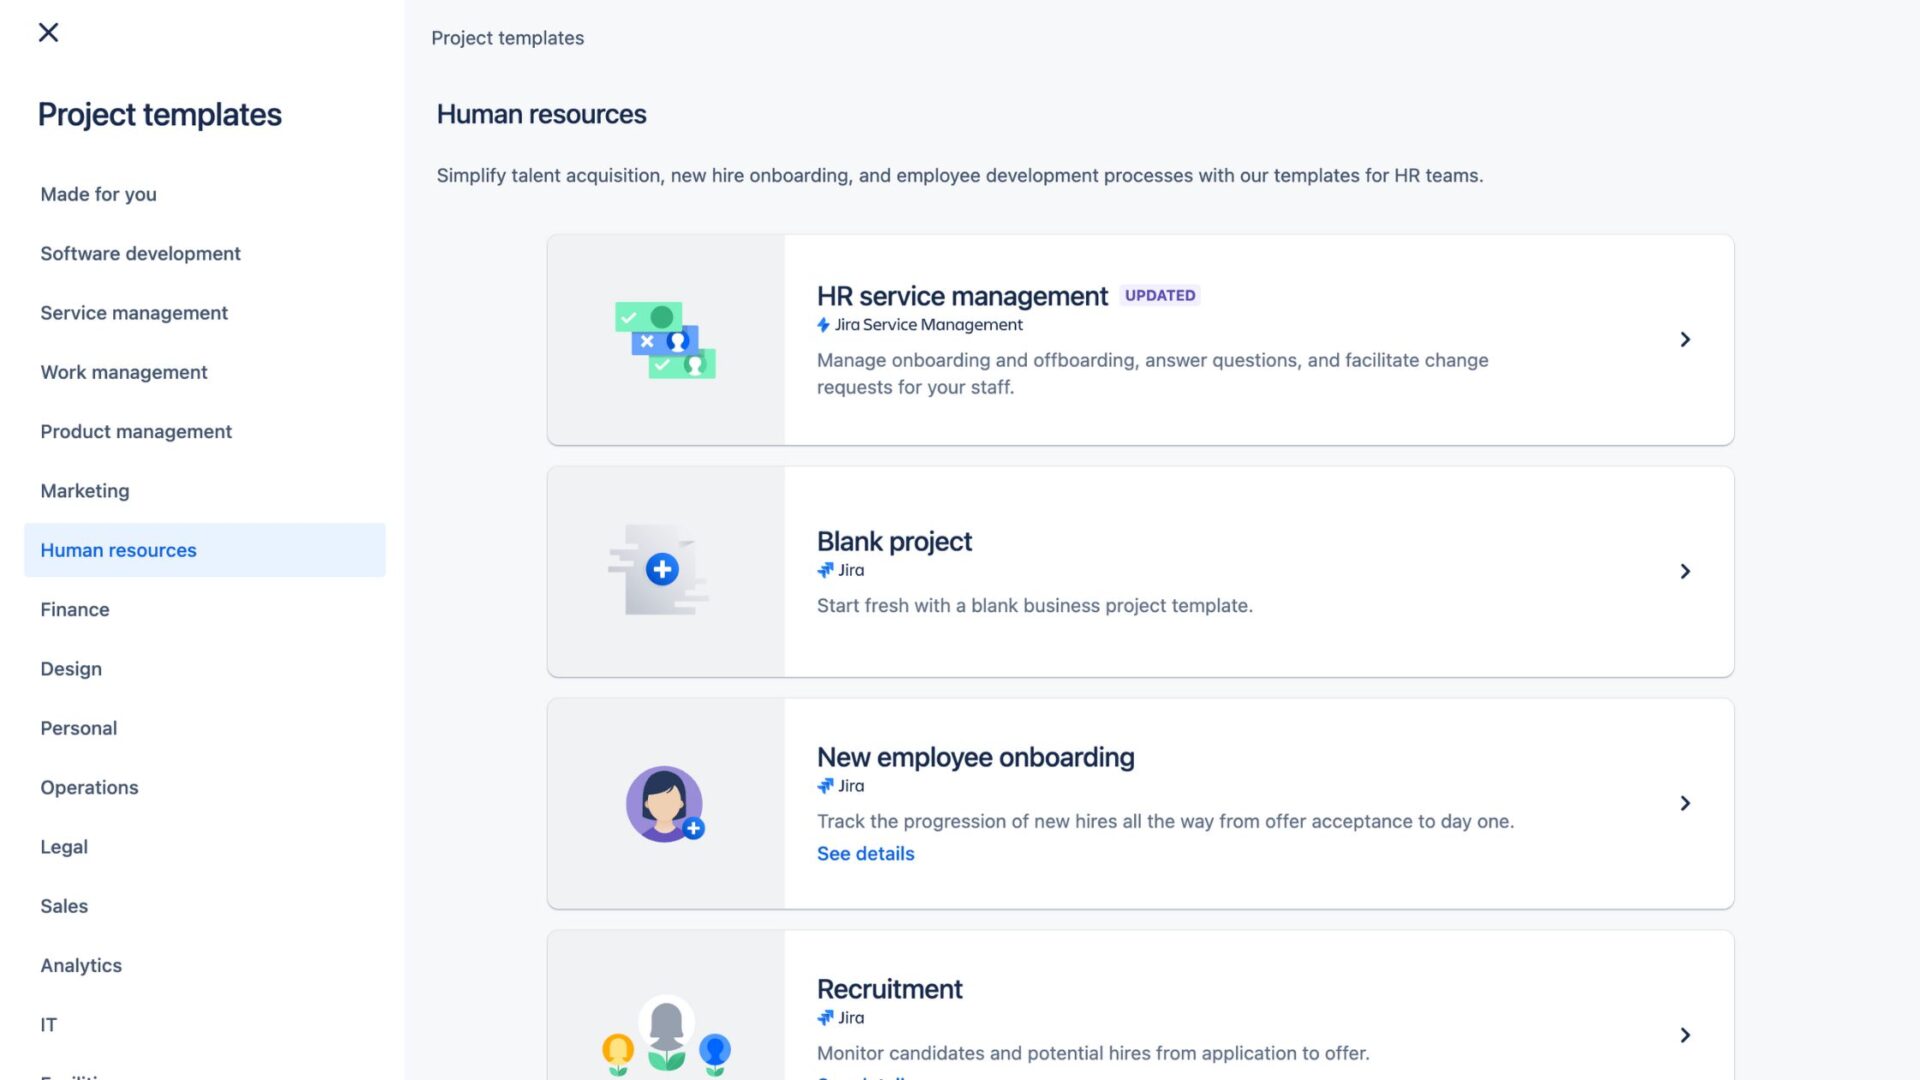 Jira provides with many project templates for various industries